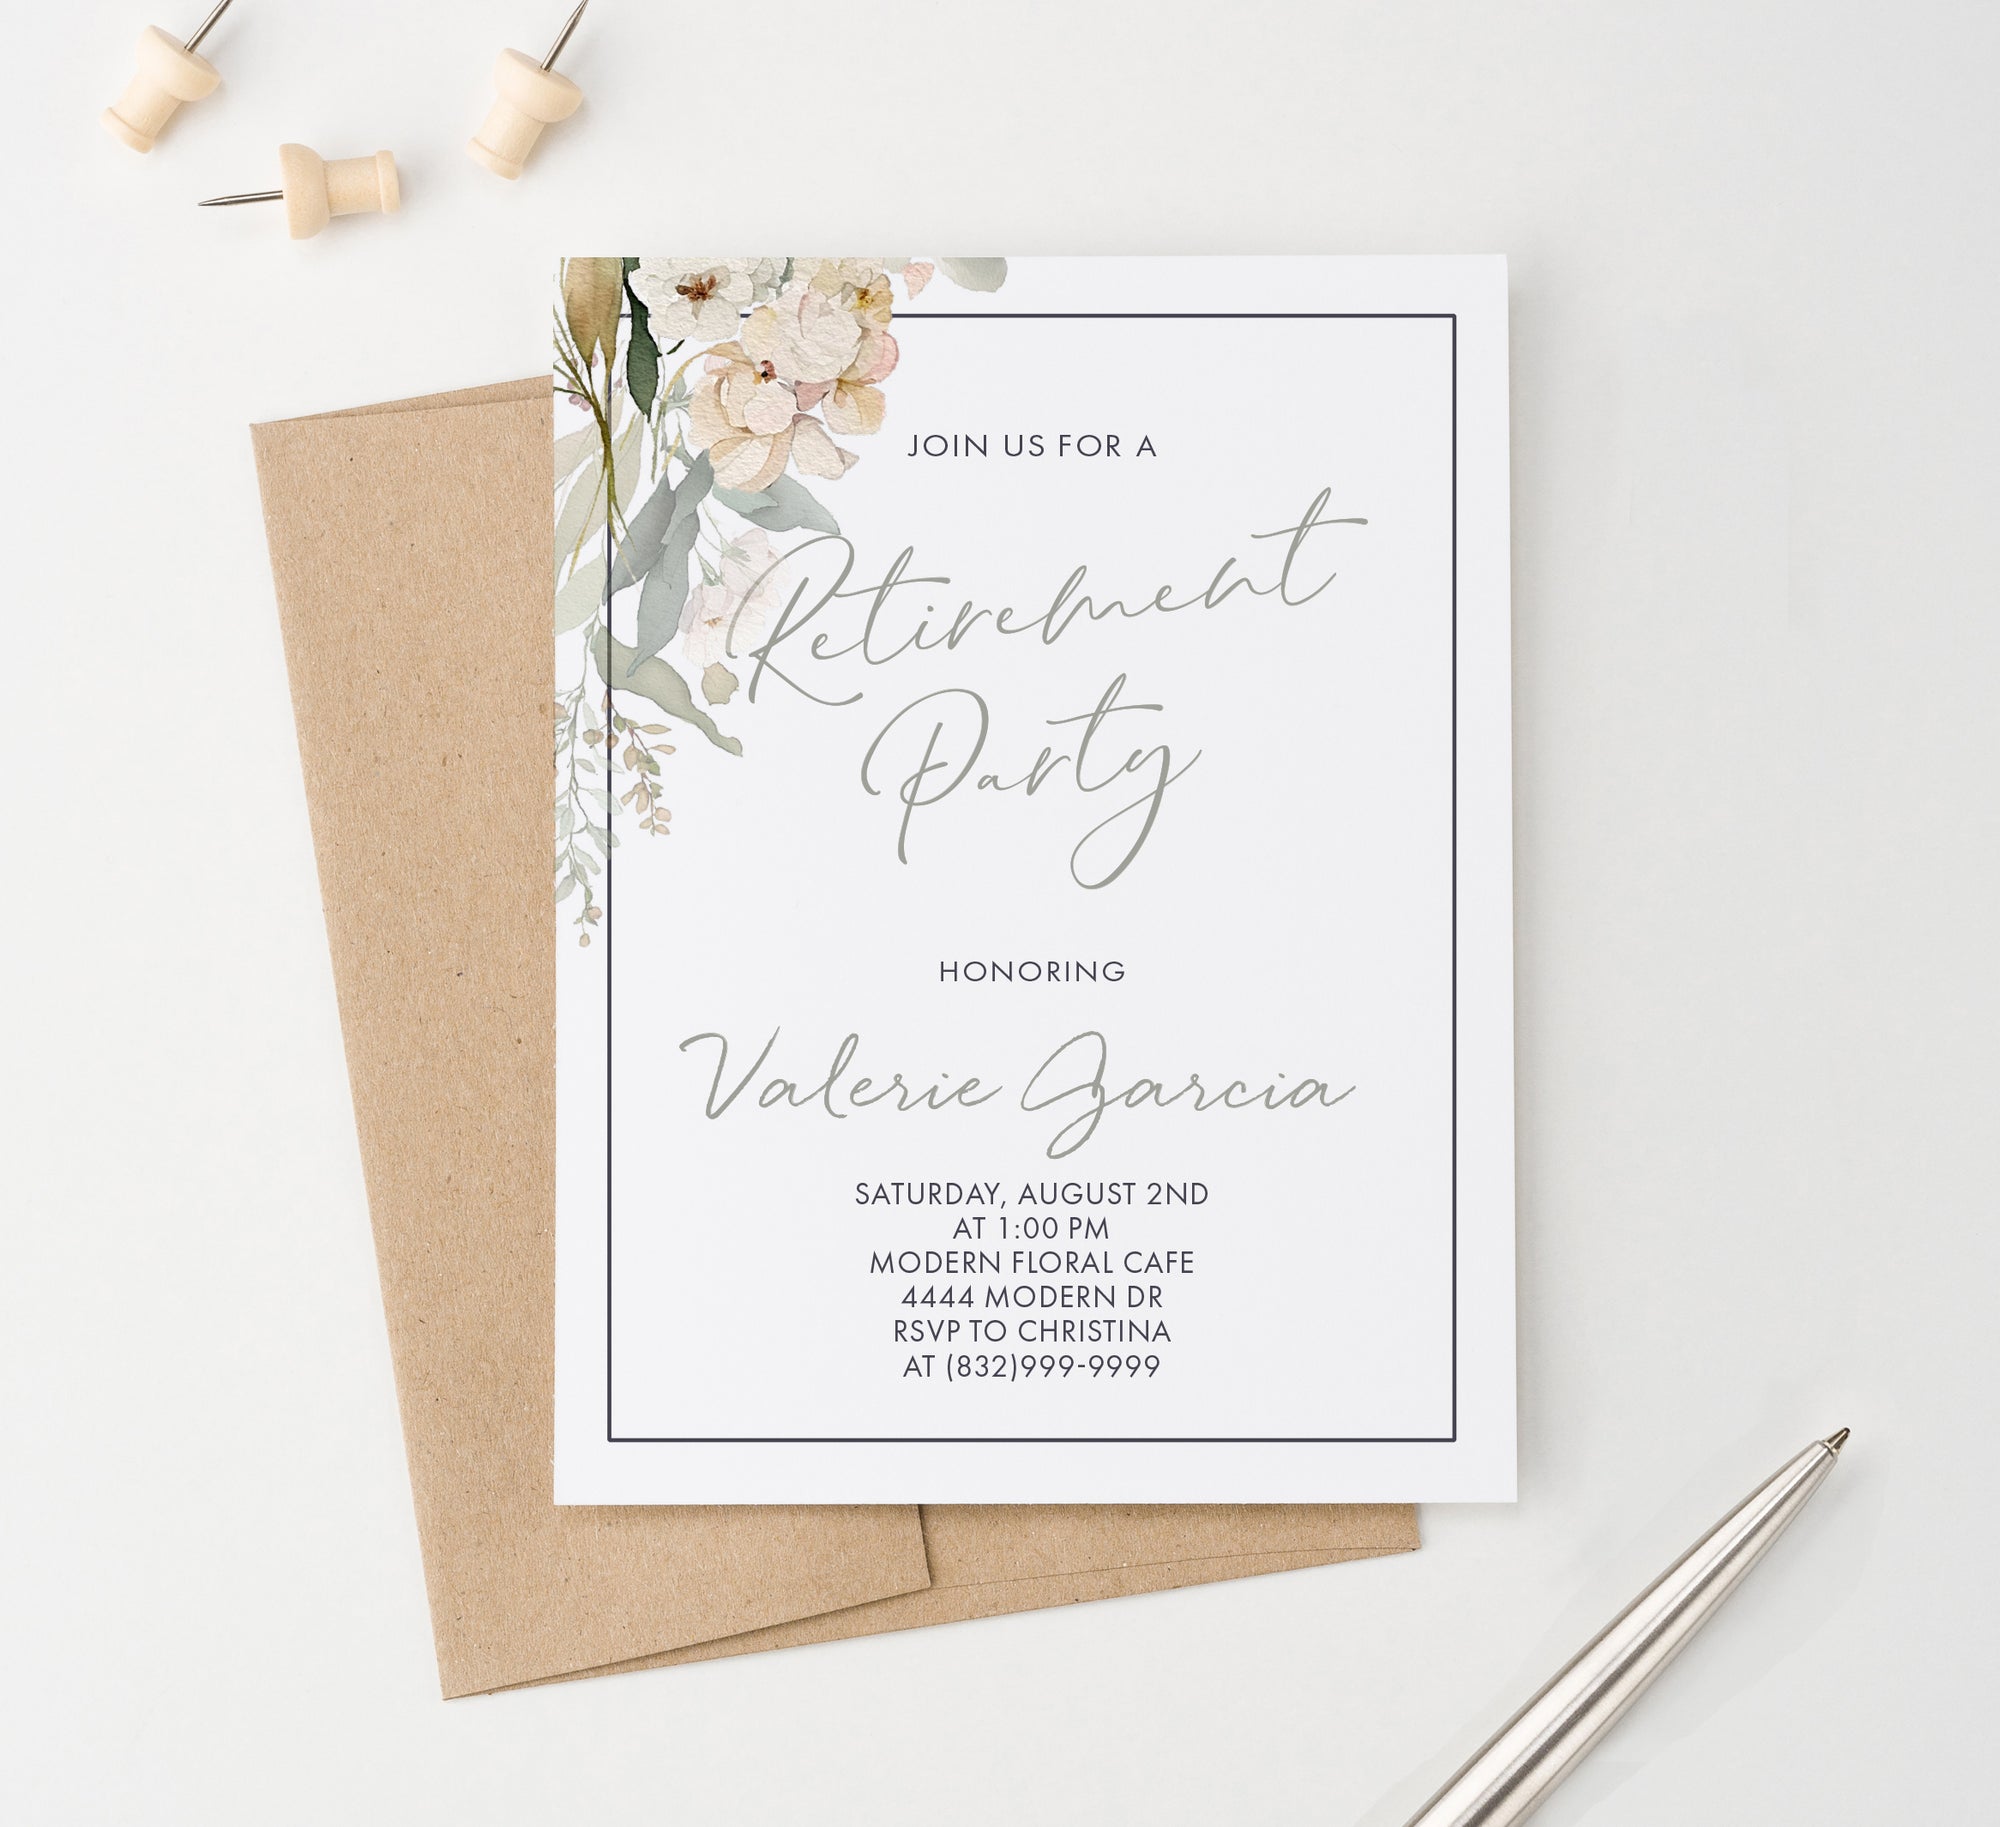 Formal Invitation For Retirement Party With Classy Florals